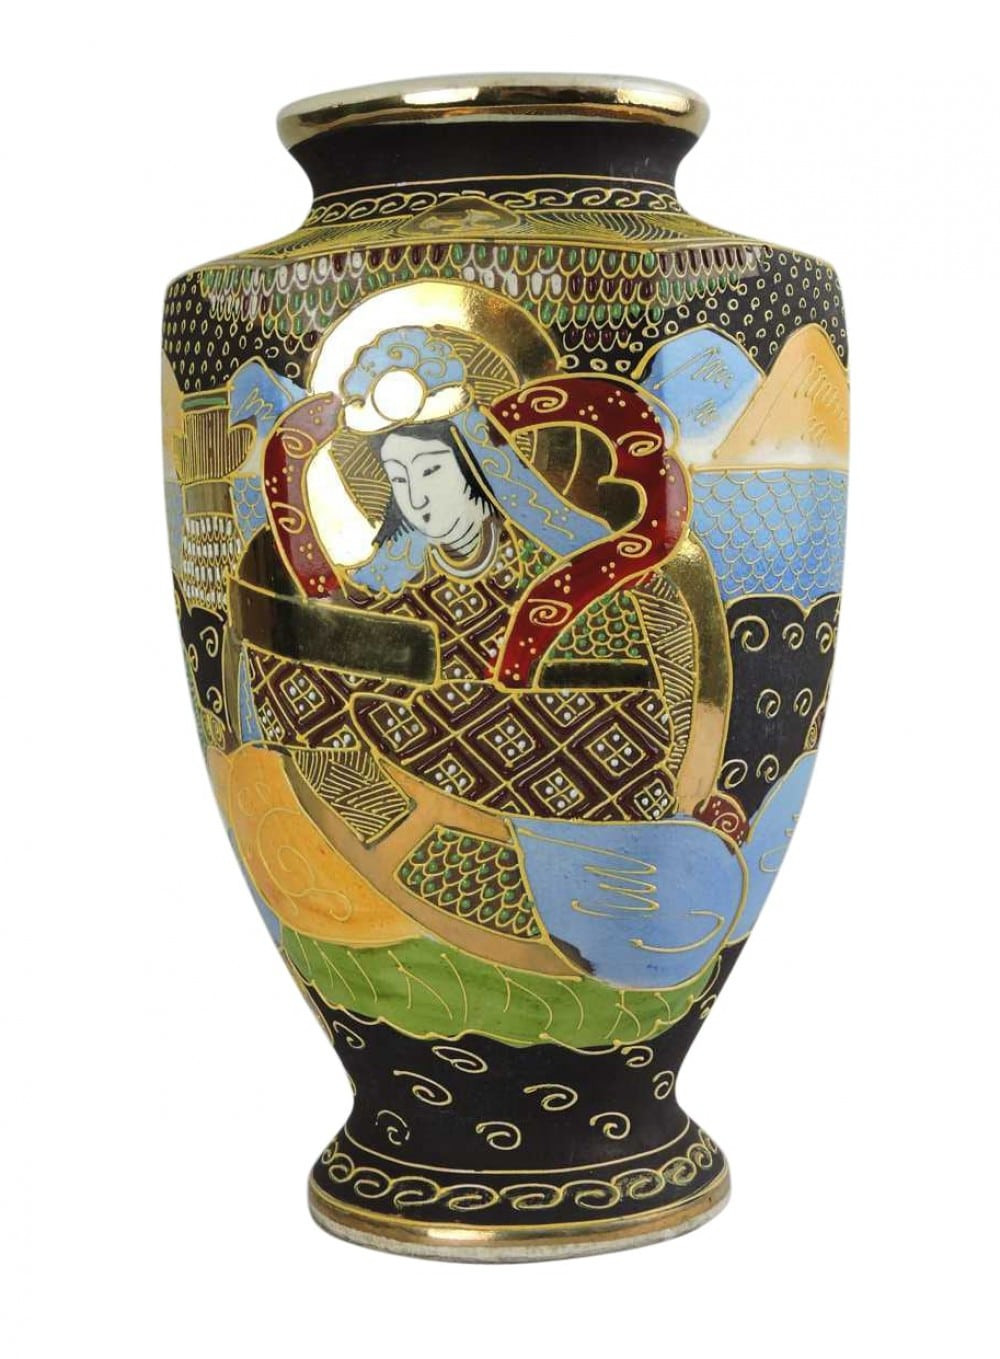 24 attractive Satsuma Vase with Handles 2023 free download satsuma vase with handles of moorcroft pomegranate pattern pedestal compote circa 1920s regarding early 20th century hand painted satsuma hexagonal vase with japanese folklore scene